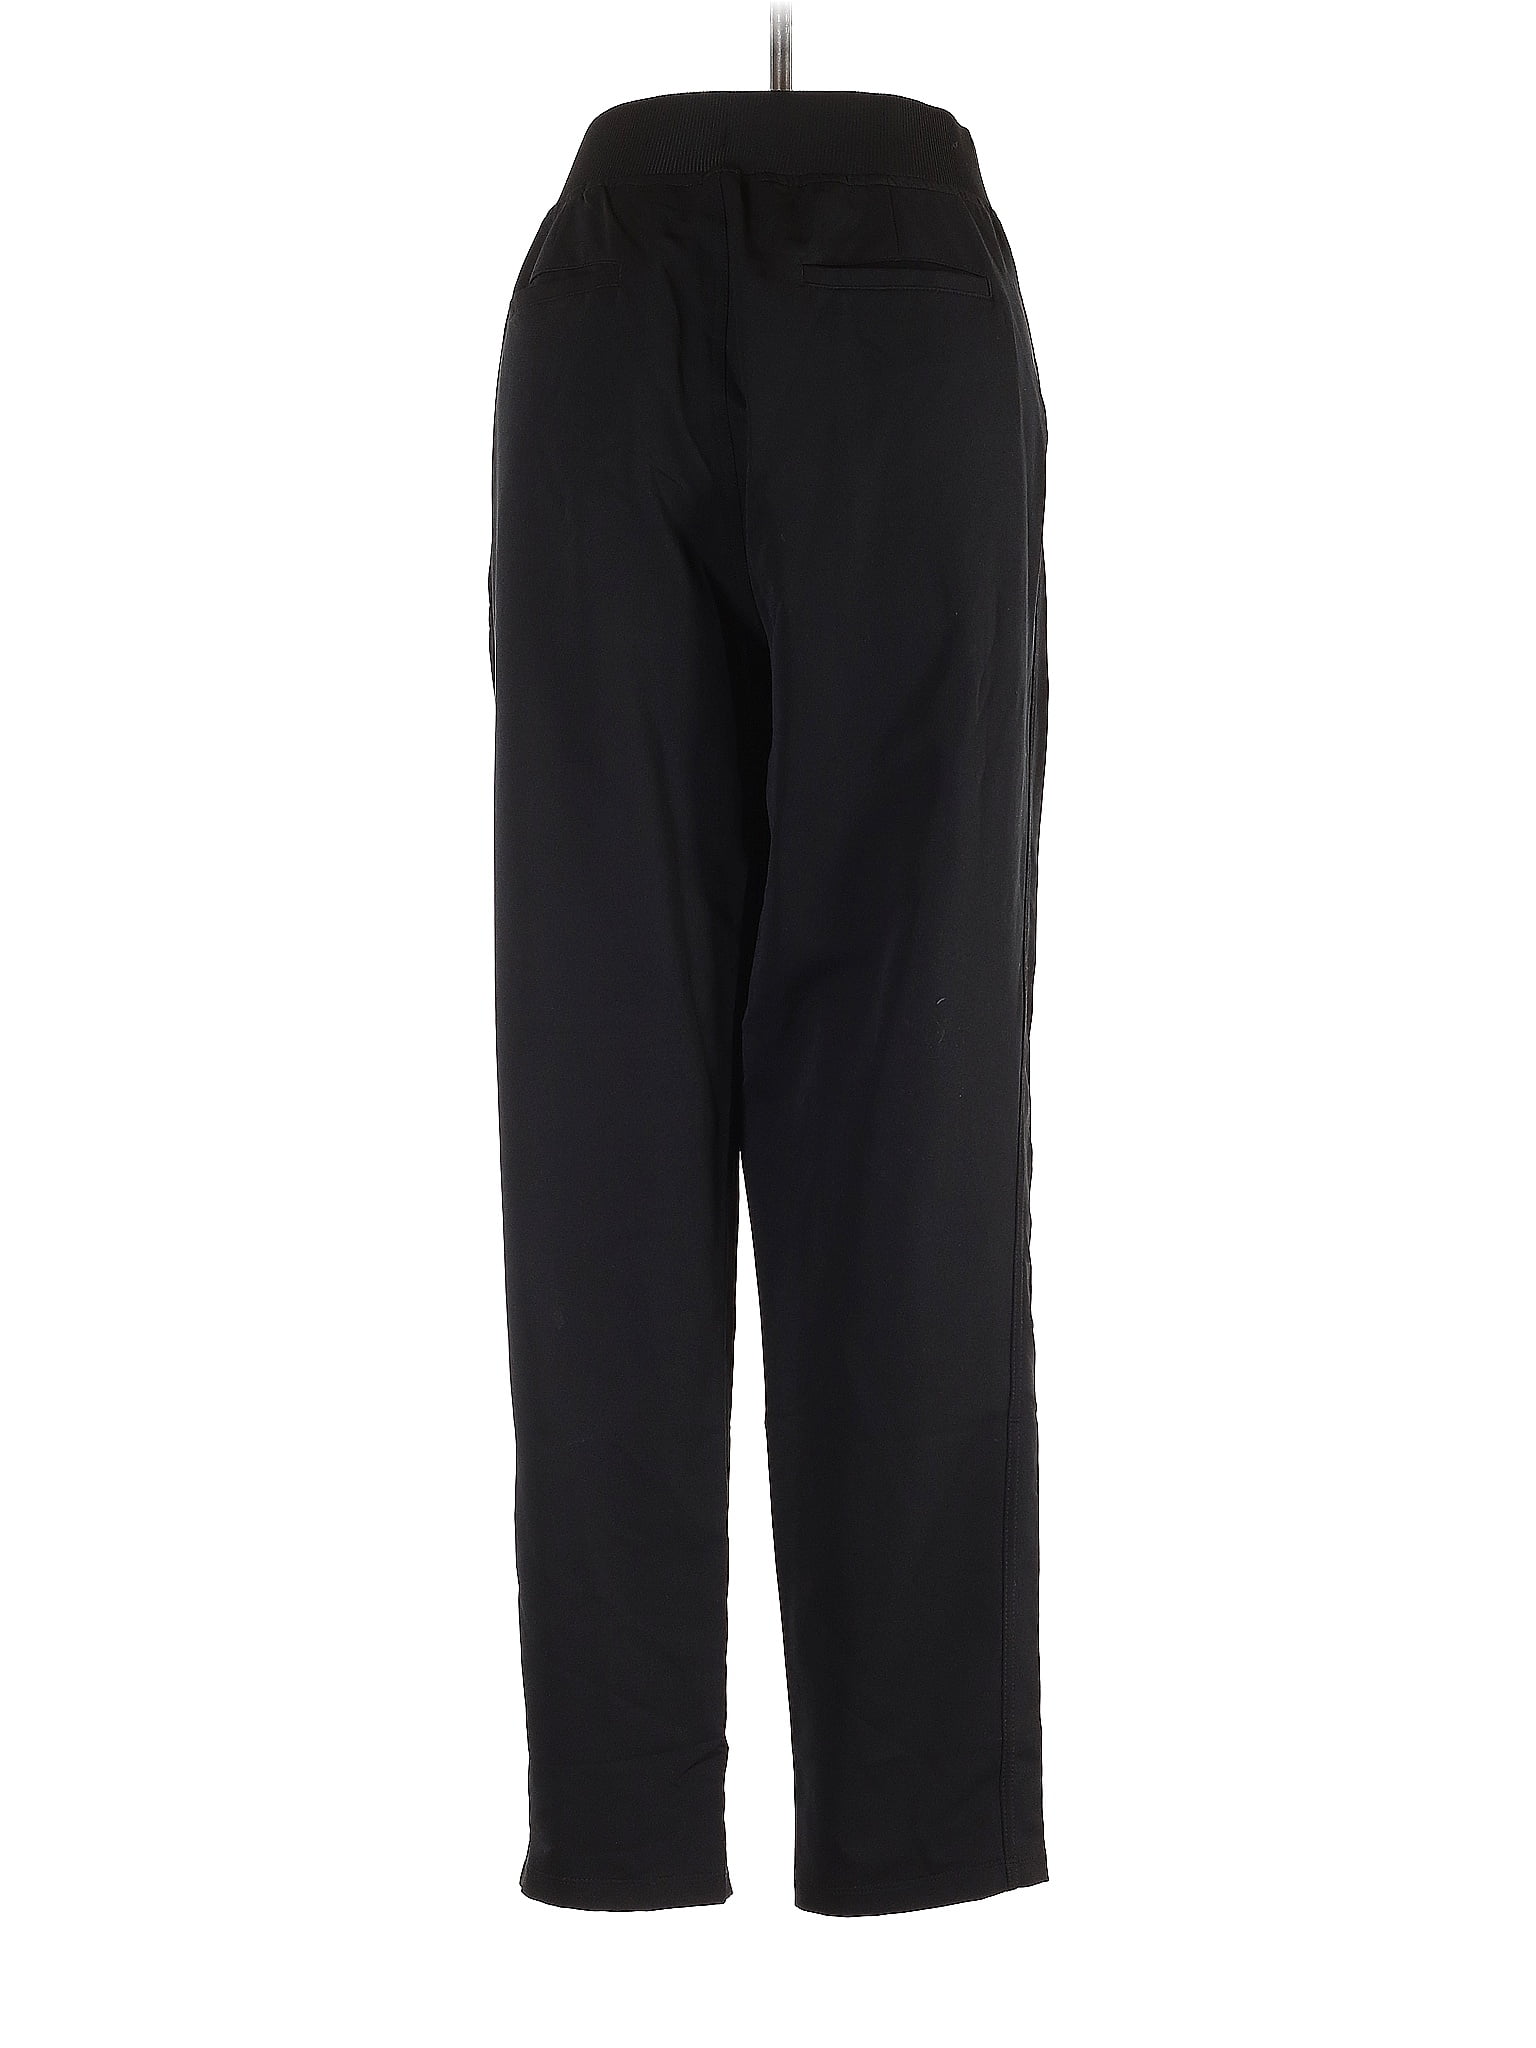 32 Degrees: Black Pants now at $11.79+